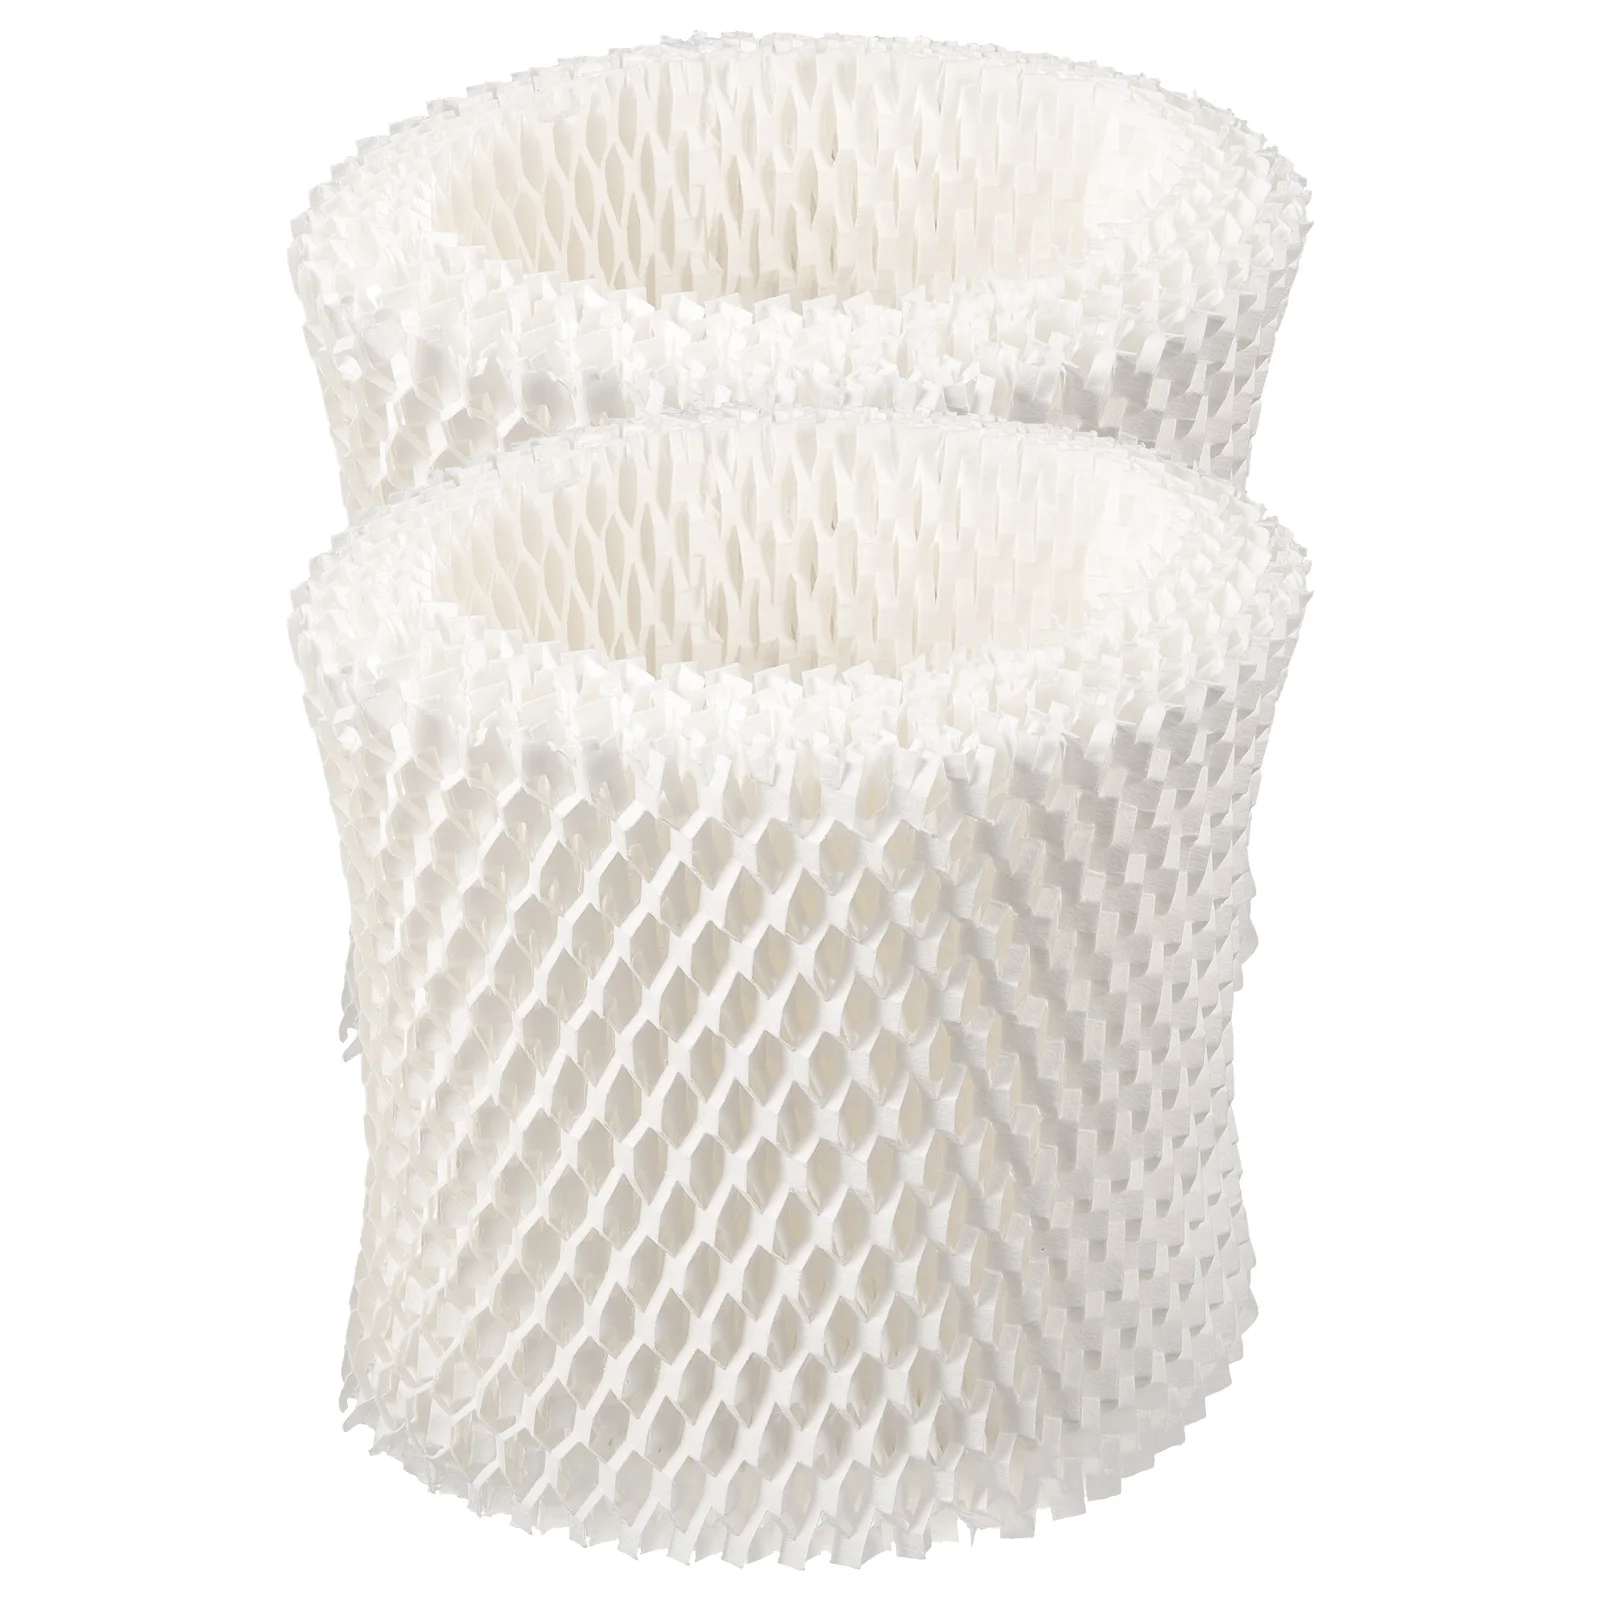 

2 Pcs Strainer Durable Humidifier Wick Protective Wicking Filter Accessory Household Honeycomb Wood Pulp Paper Replacement